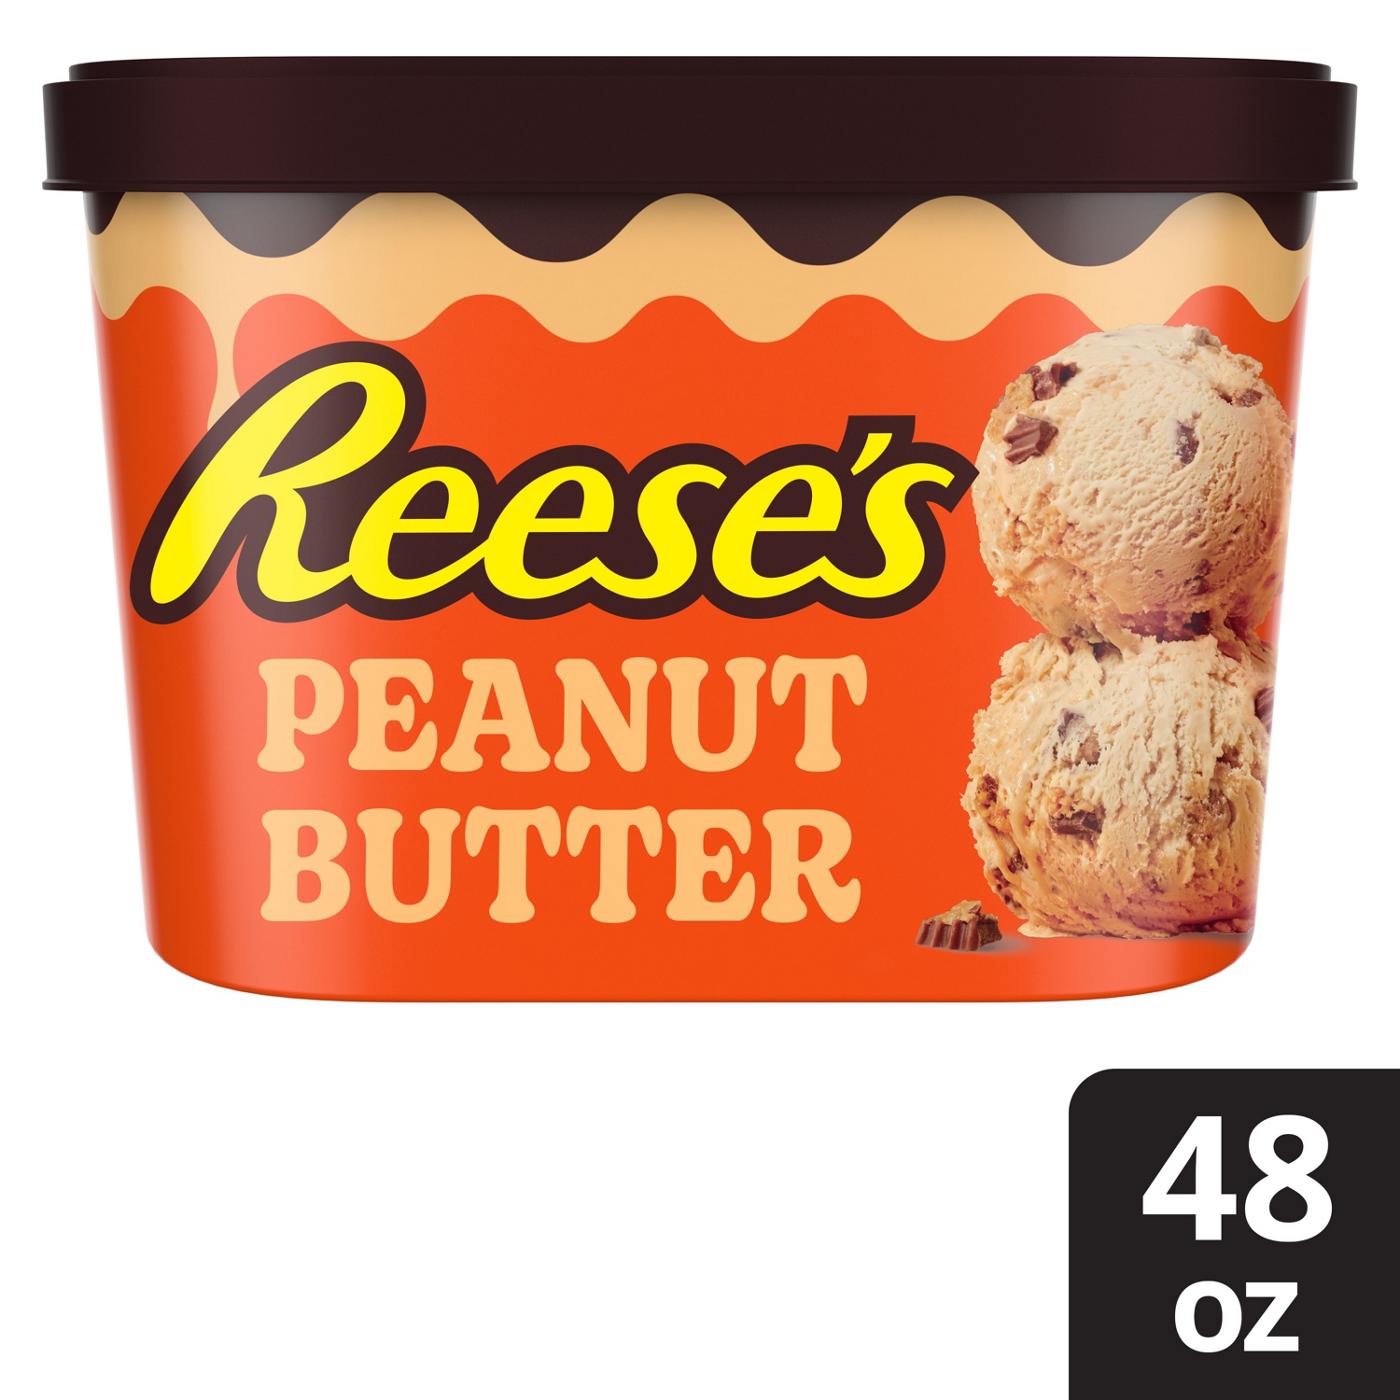 Reese's Peanut Butter Light Ice Cream with Reese's Peanut Butter Cups & Peanut Butter Swirl; image 5 of 7